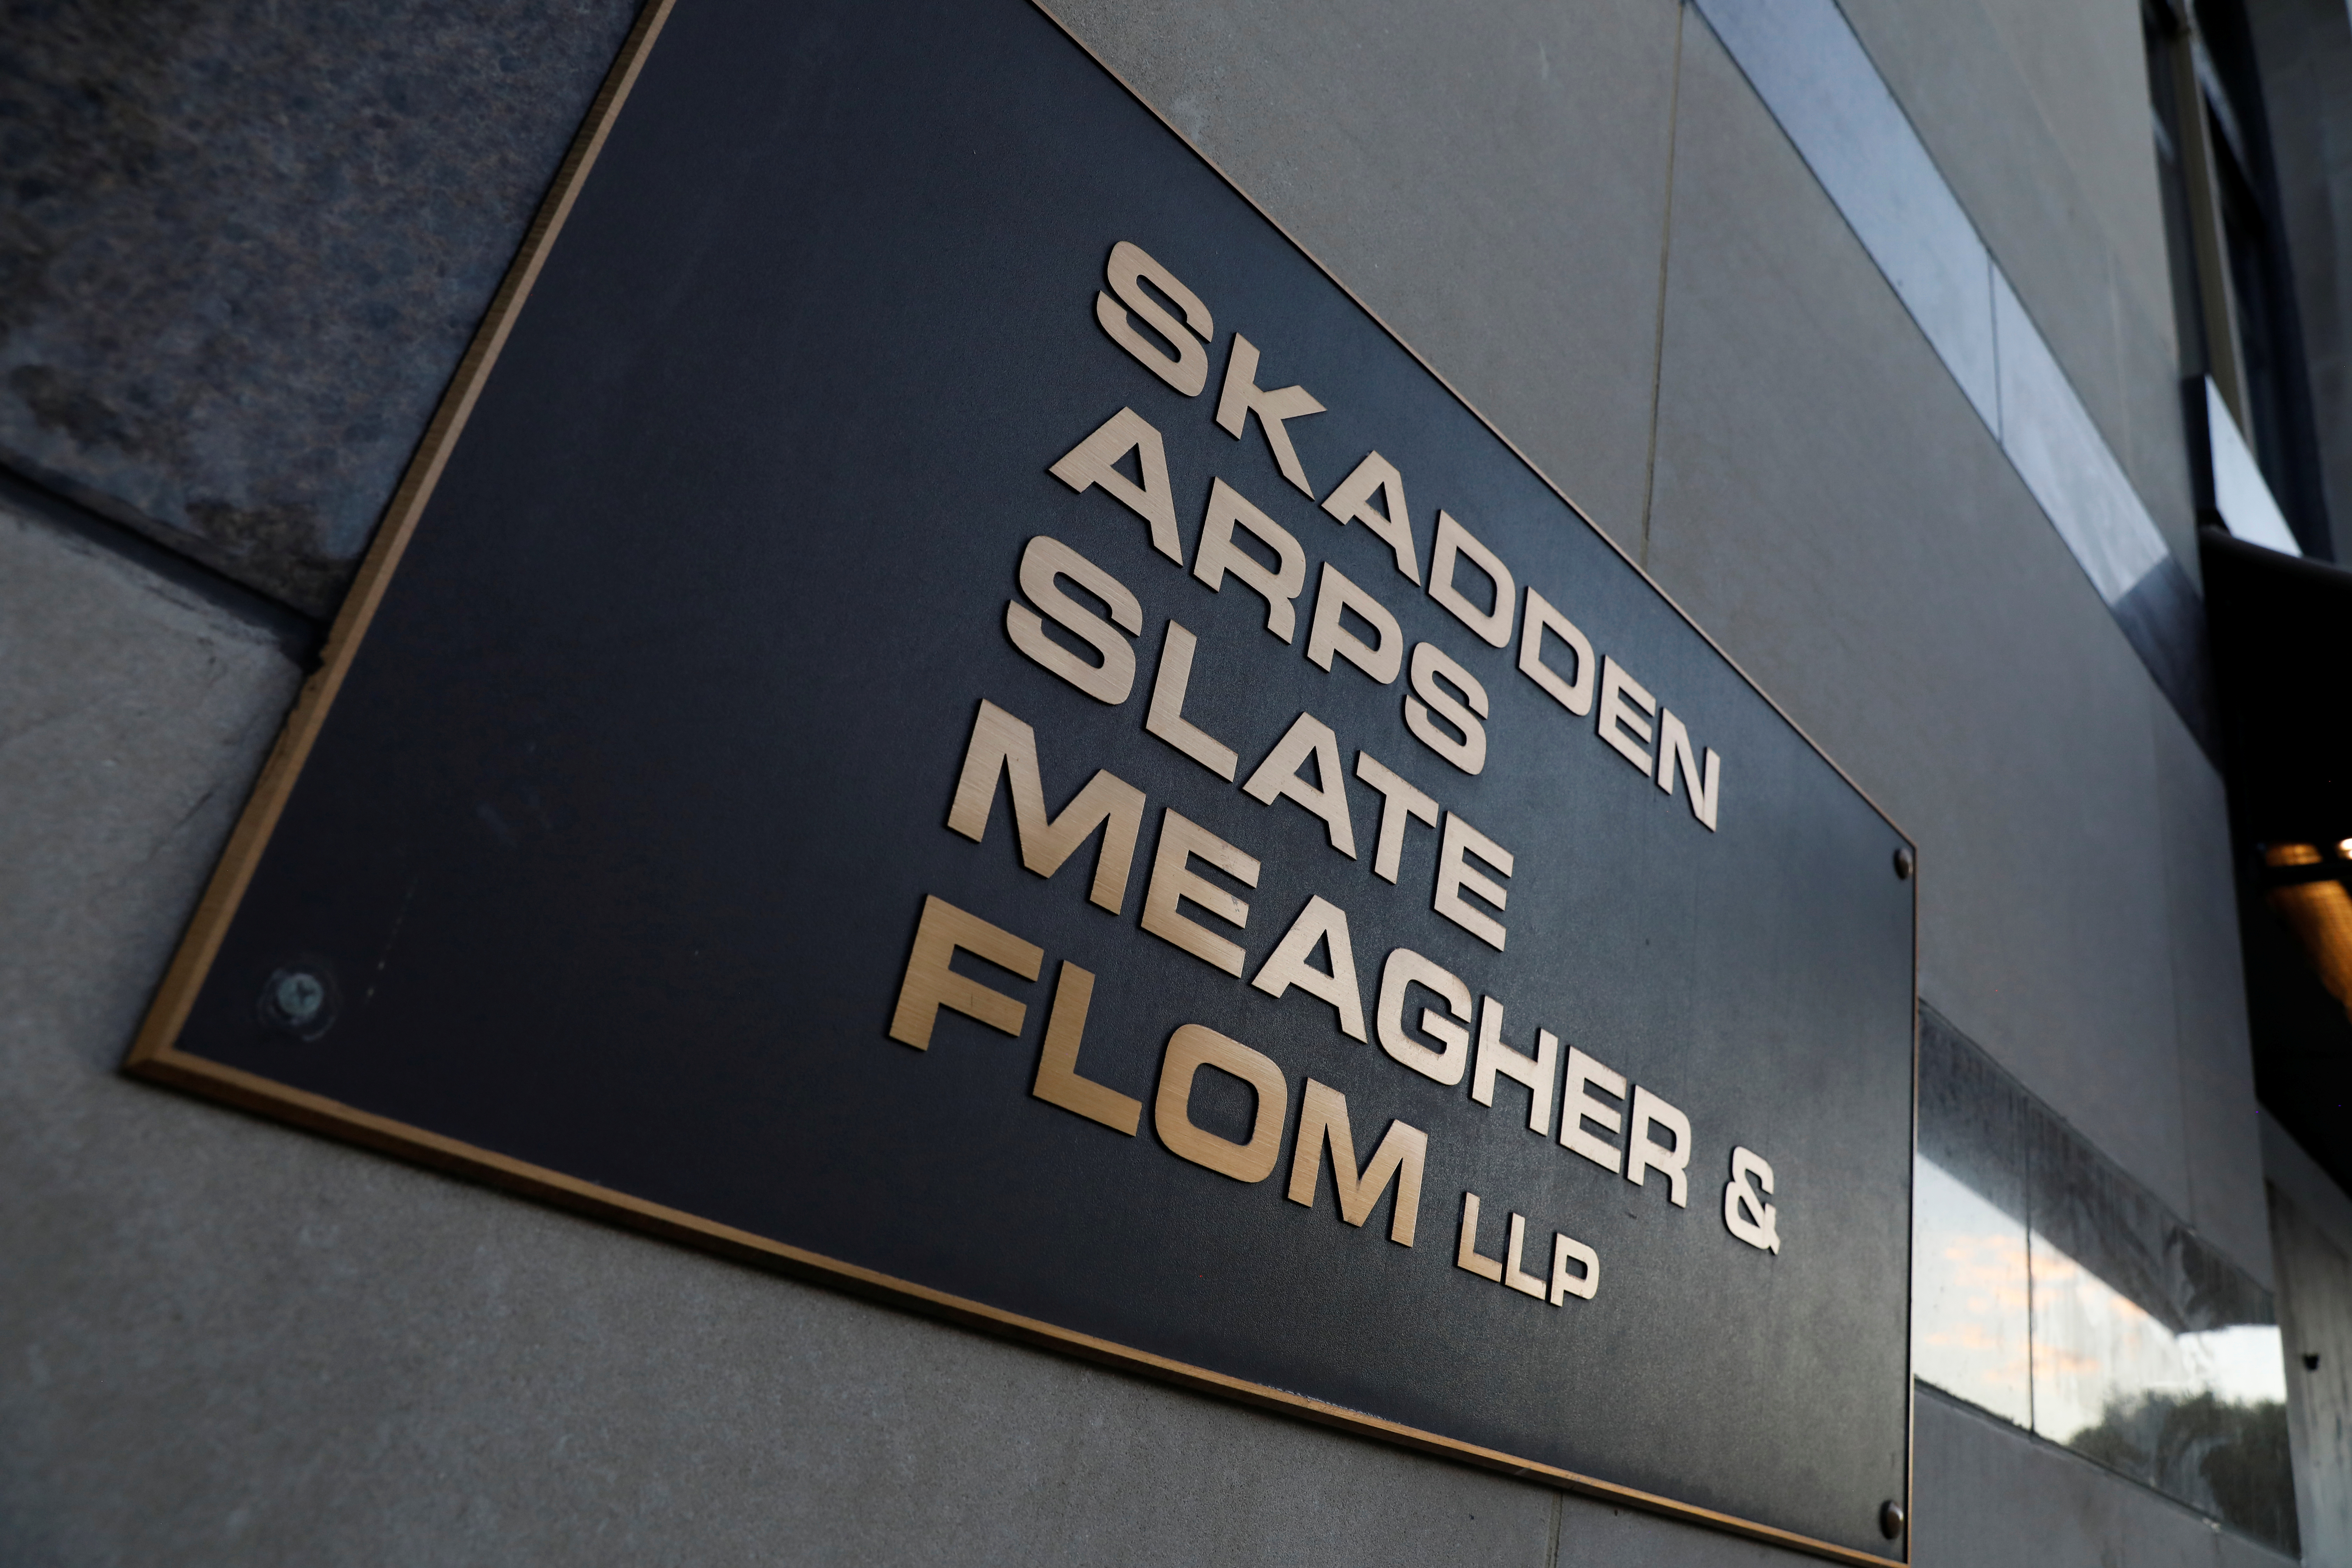 Signage is seen outside of the law firm Skadden, Arps, Slate, Meagher & Flom LLP in Washington, D.C.